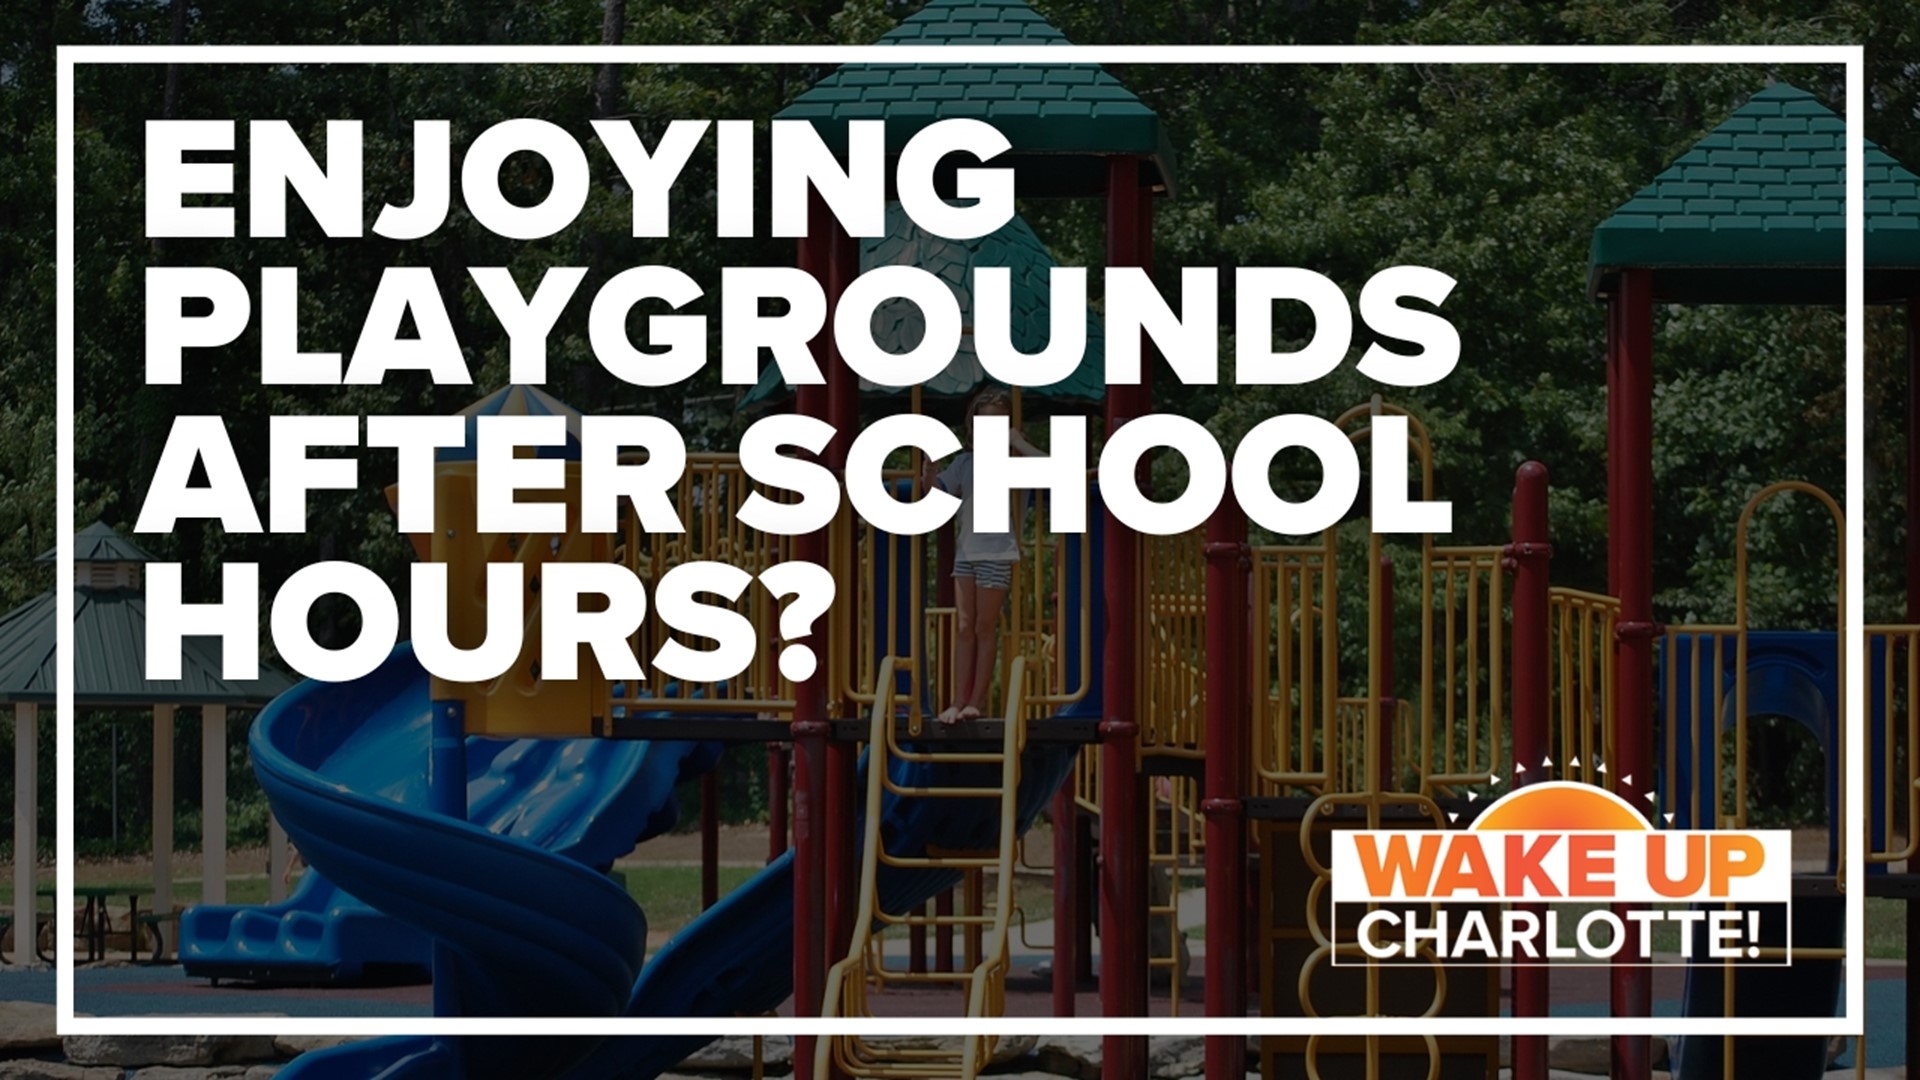 A viewer told us they are seeing more and more families use the CMS playgrounds after school.